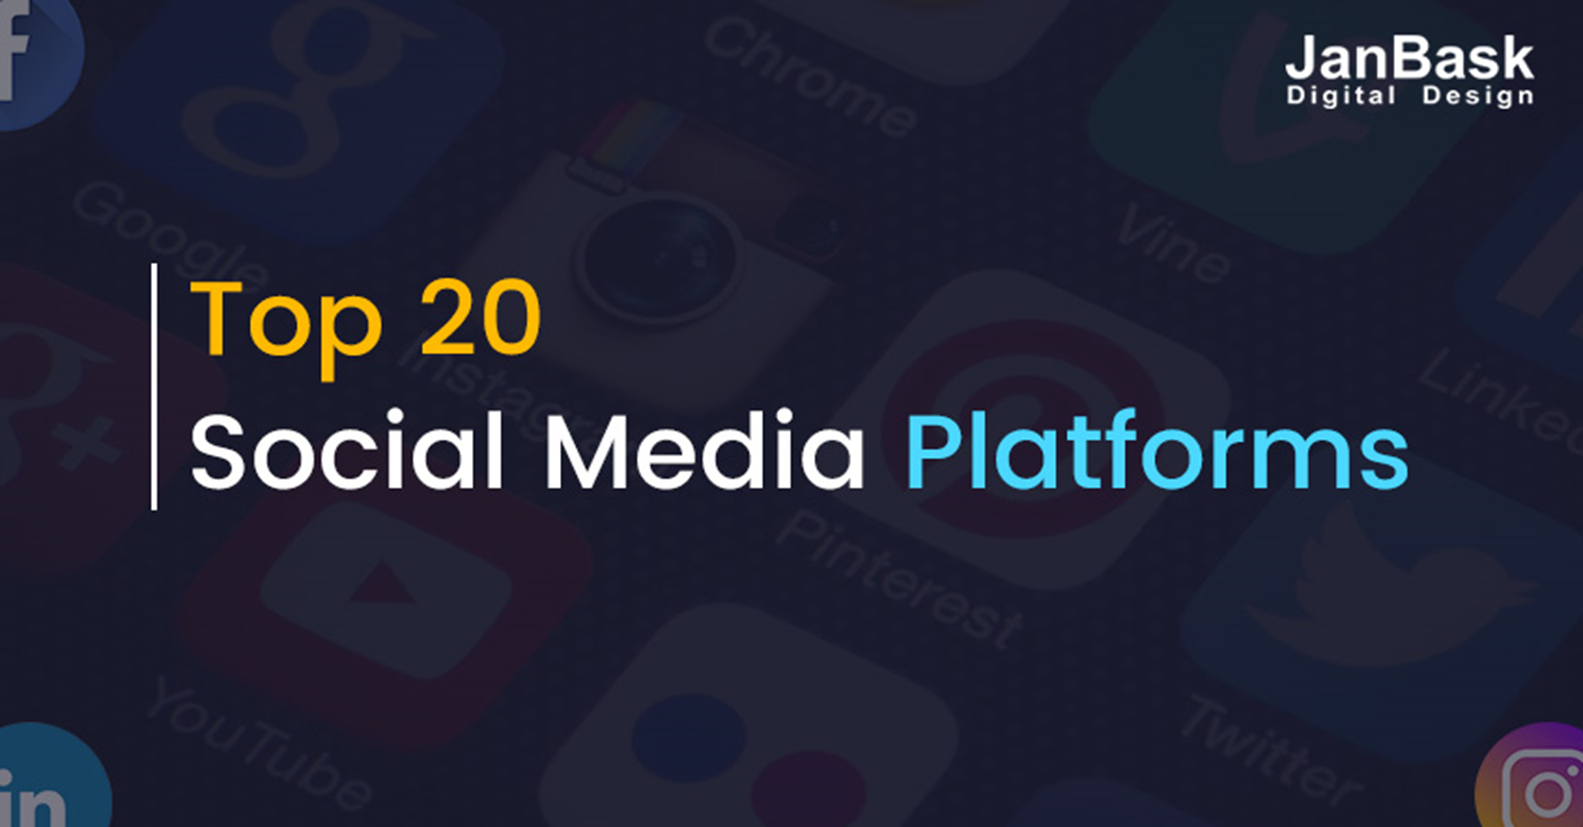 Ppt – Top 20 Social Media Platforms To Consider For Your With University Of Miami Powerpoint Template